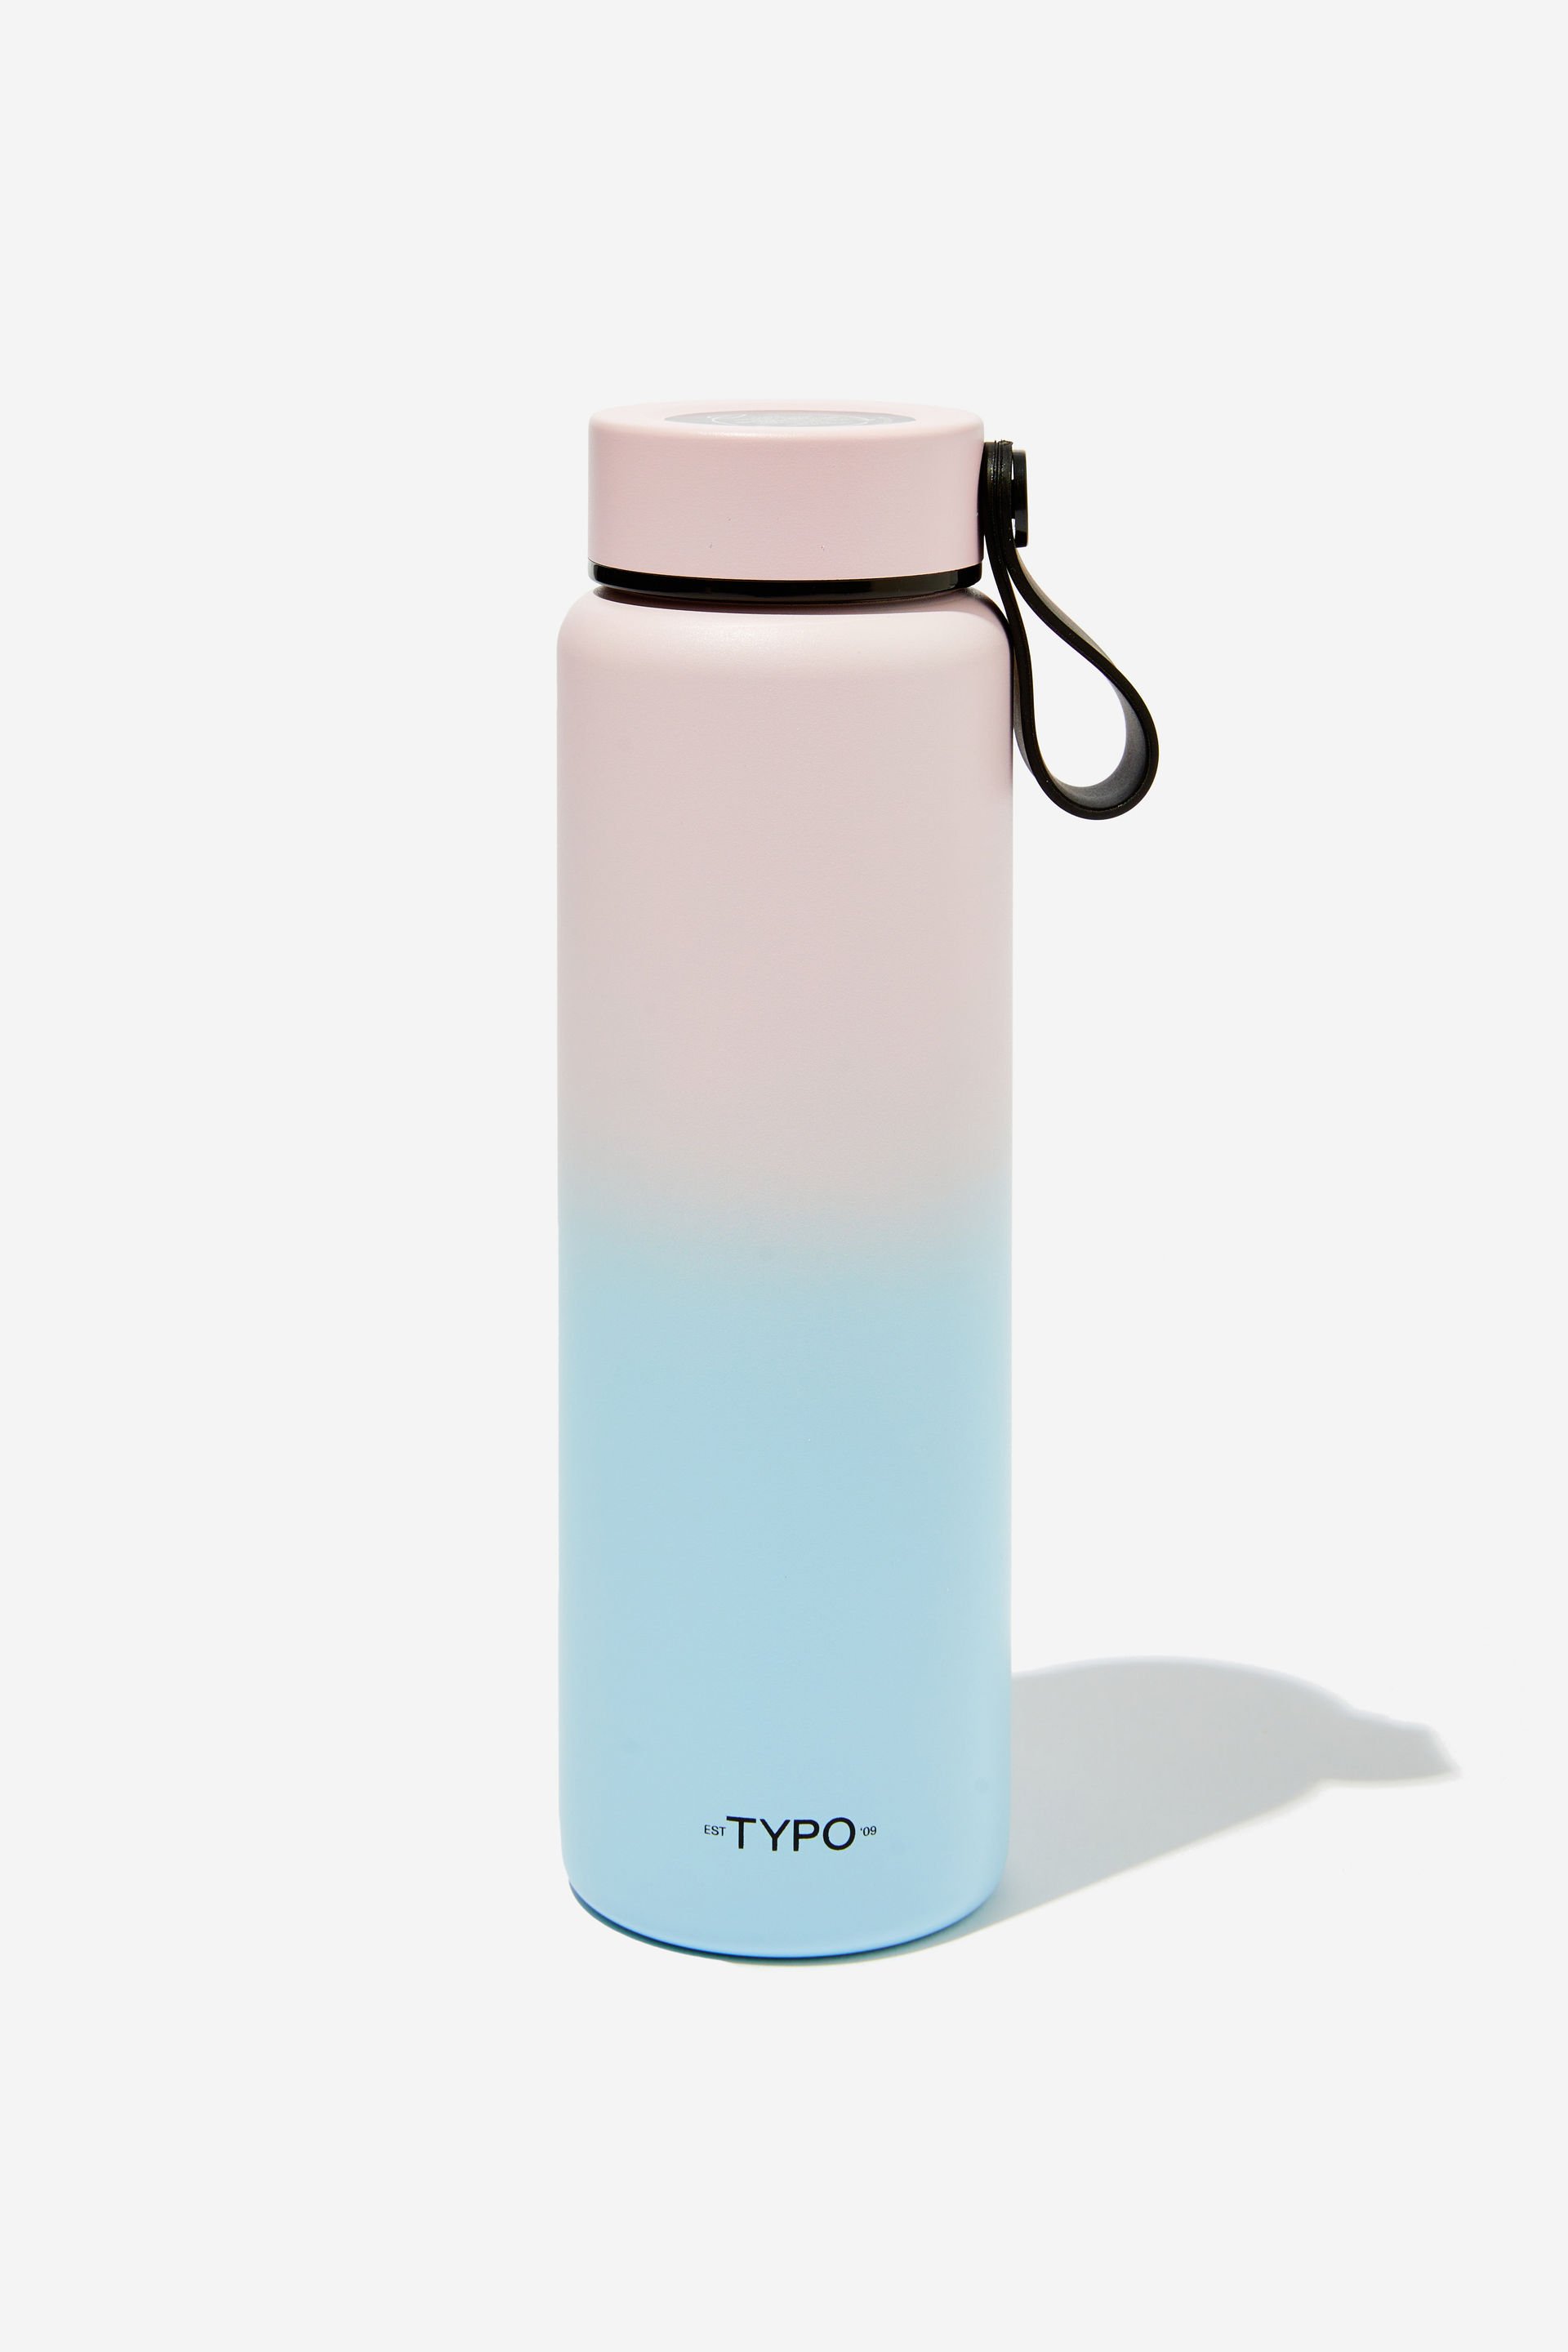 Typo - On The Move 500Ml Drink Bottle 2.0 - Ballet blush arctic blue ombre